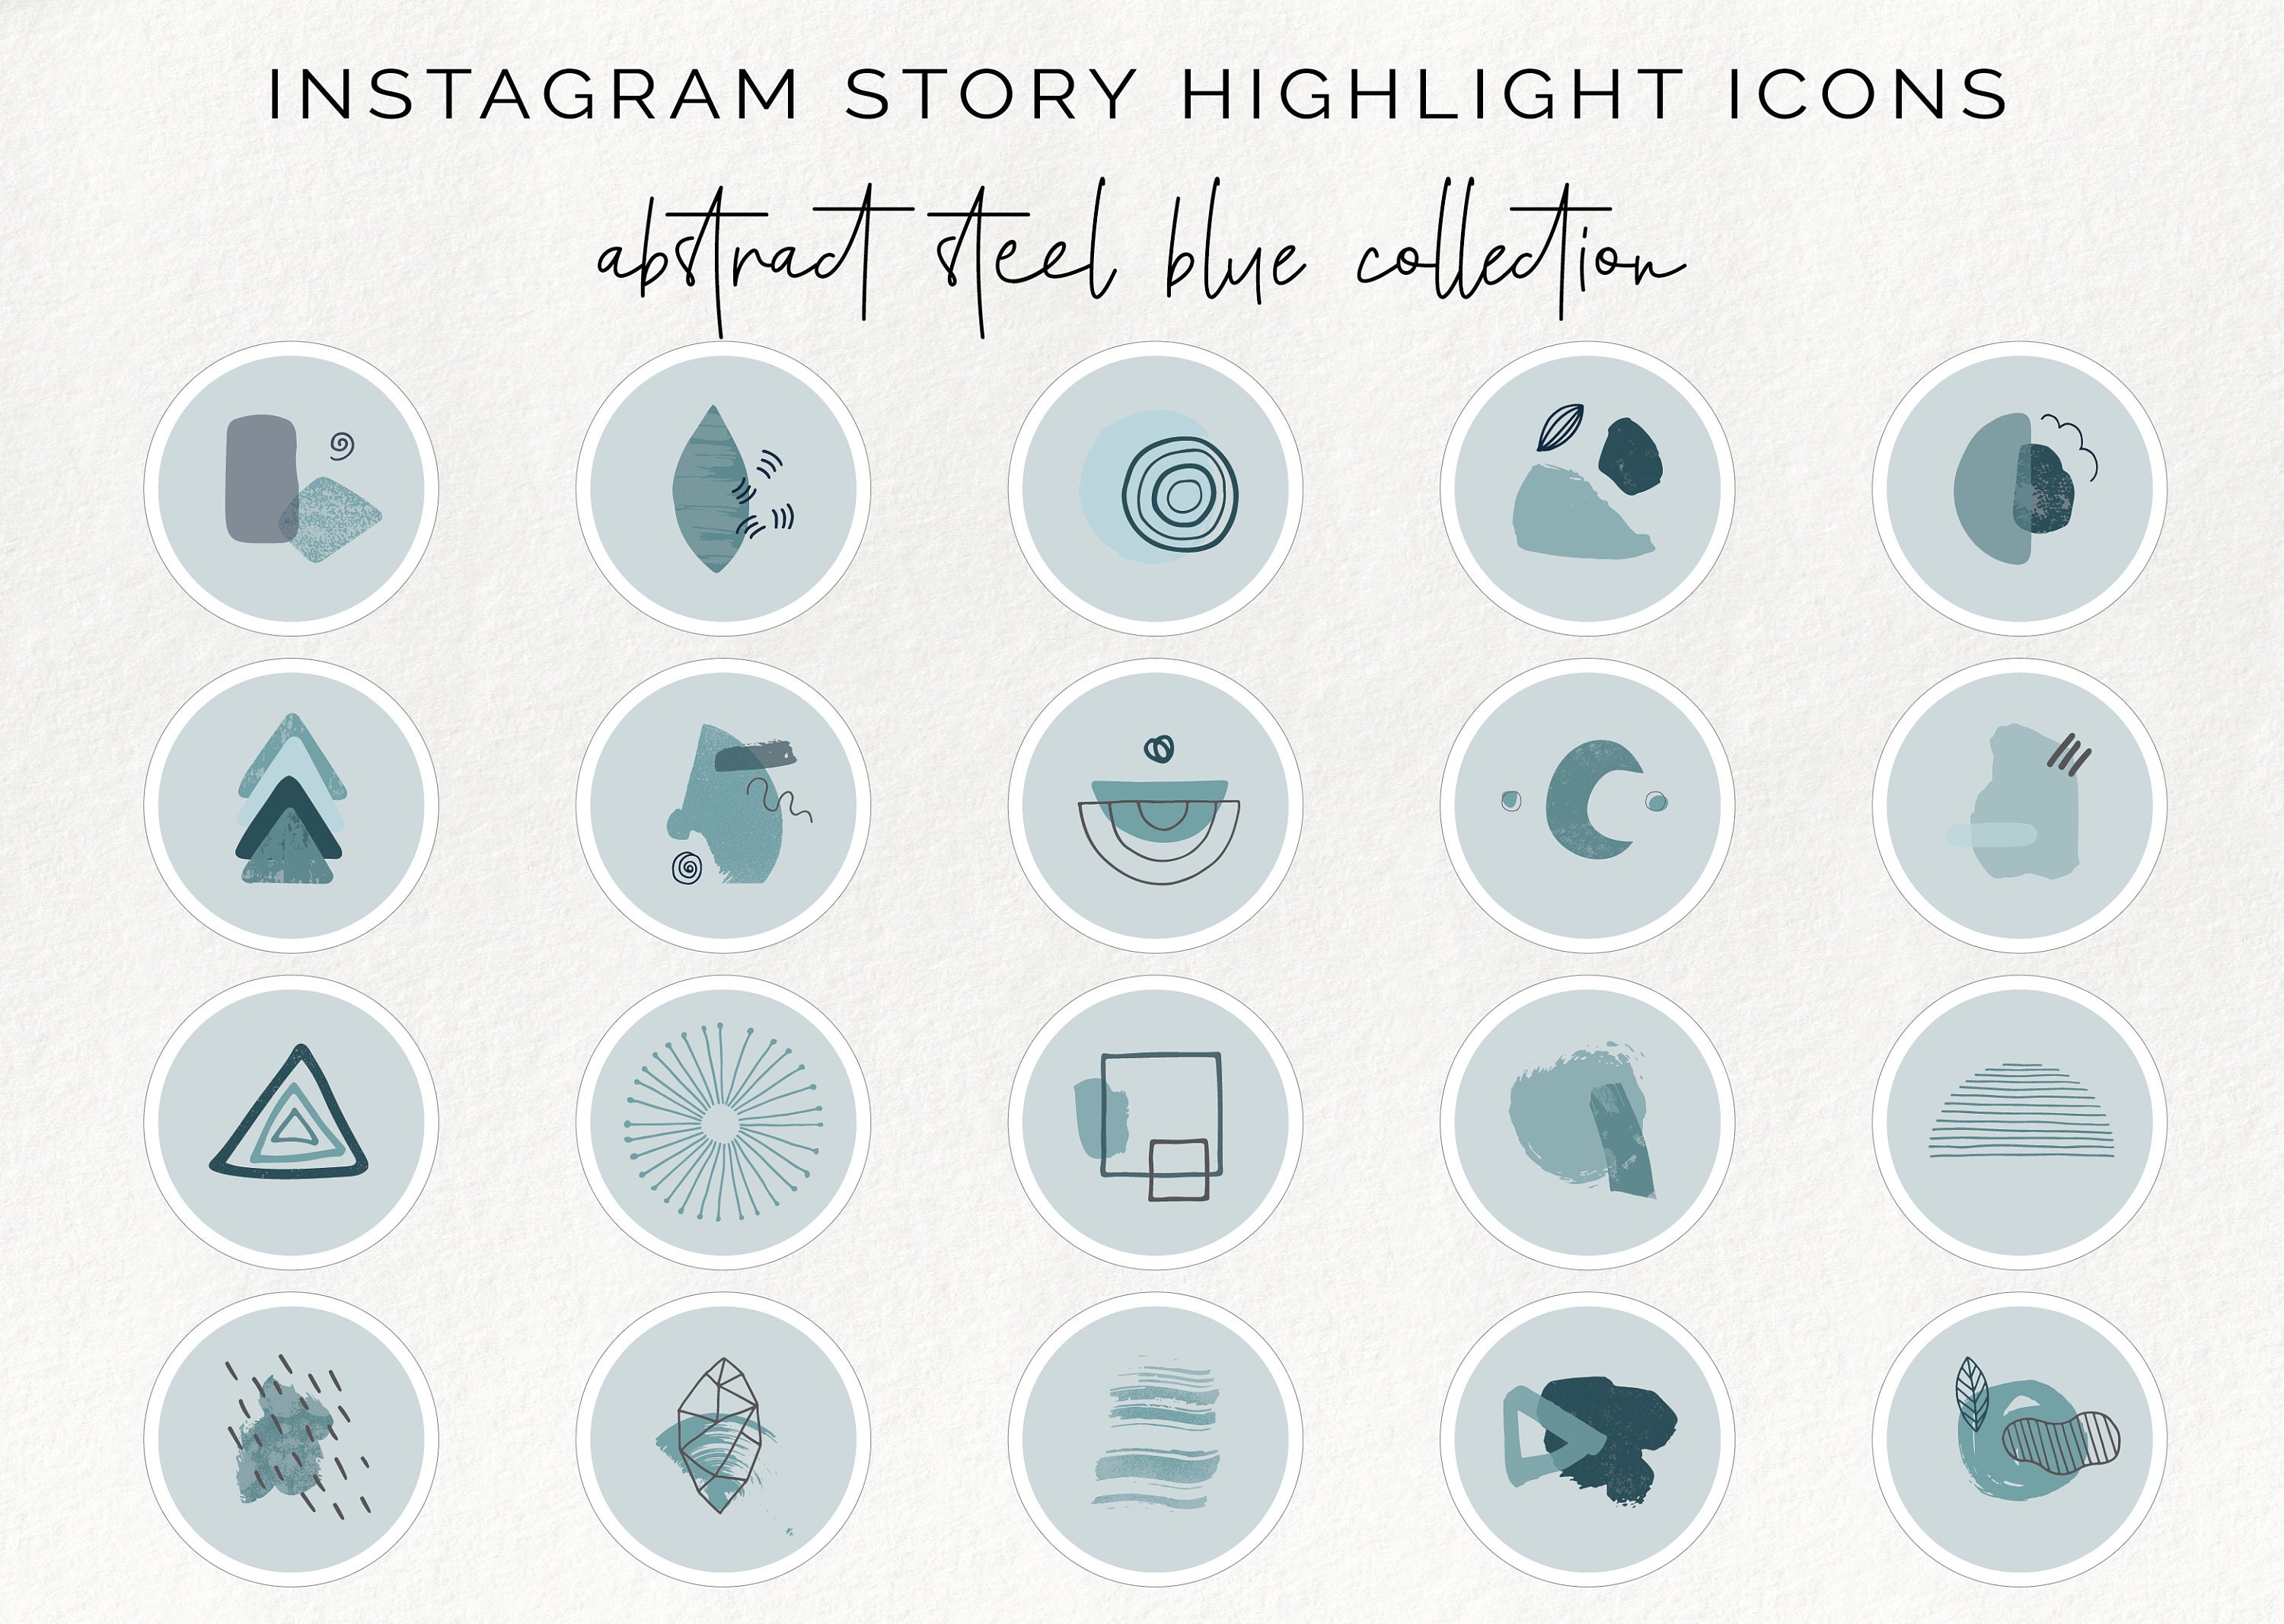 20 Instagram story highlight icons abstract instagram story | Etsy